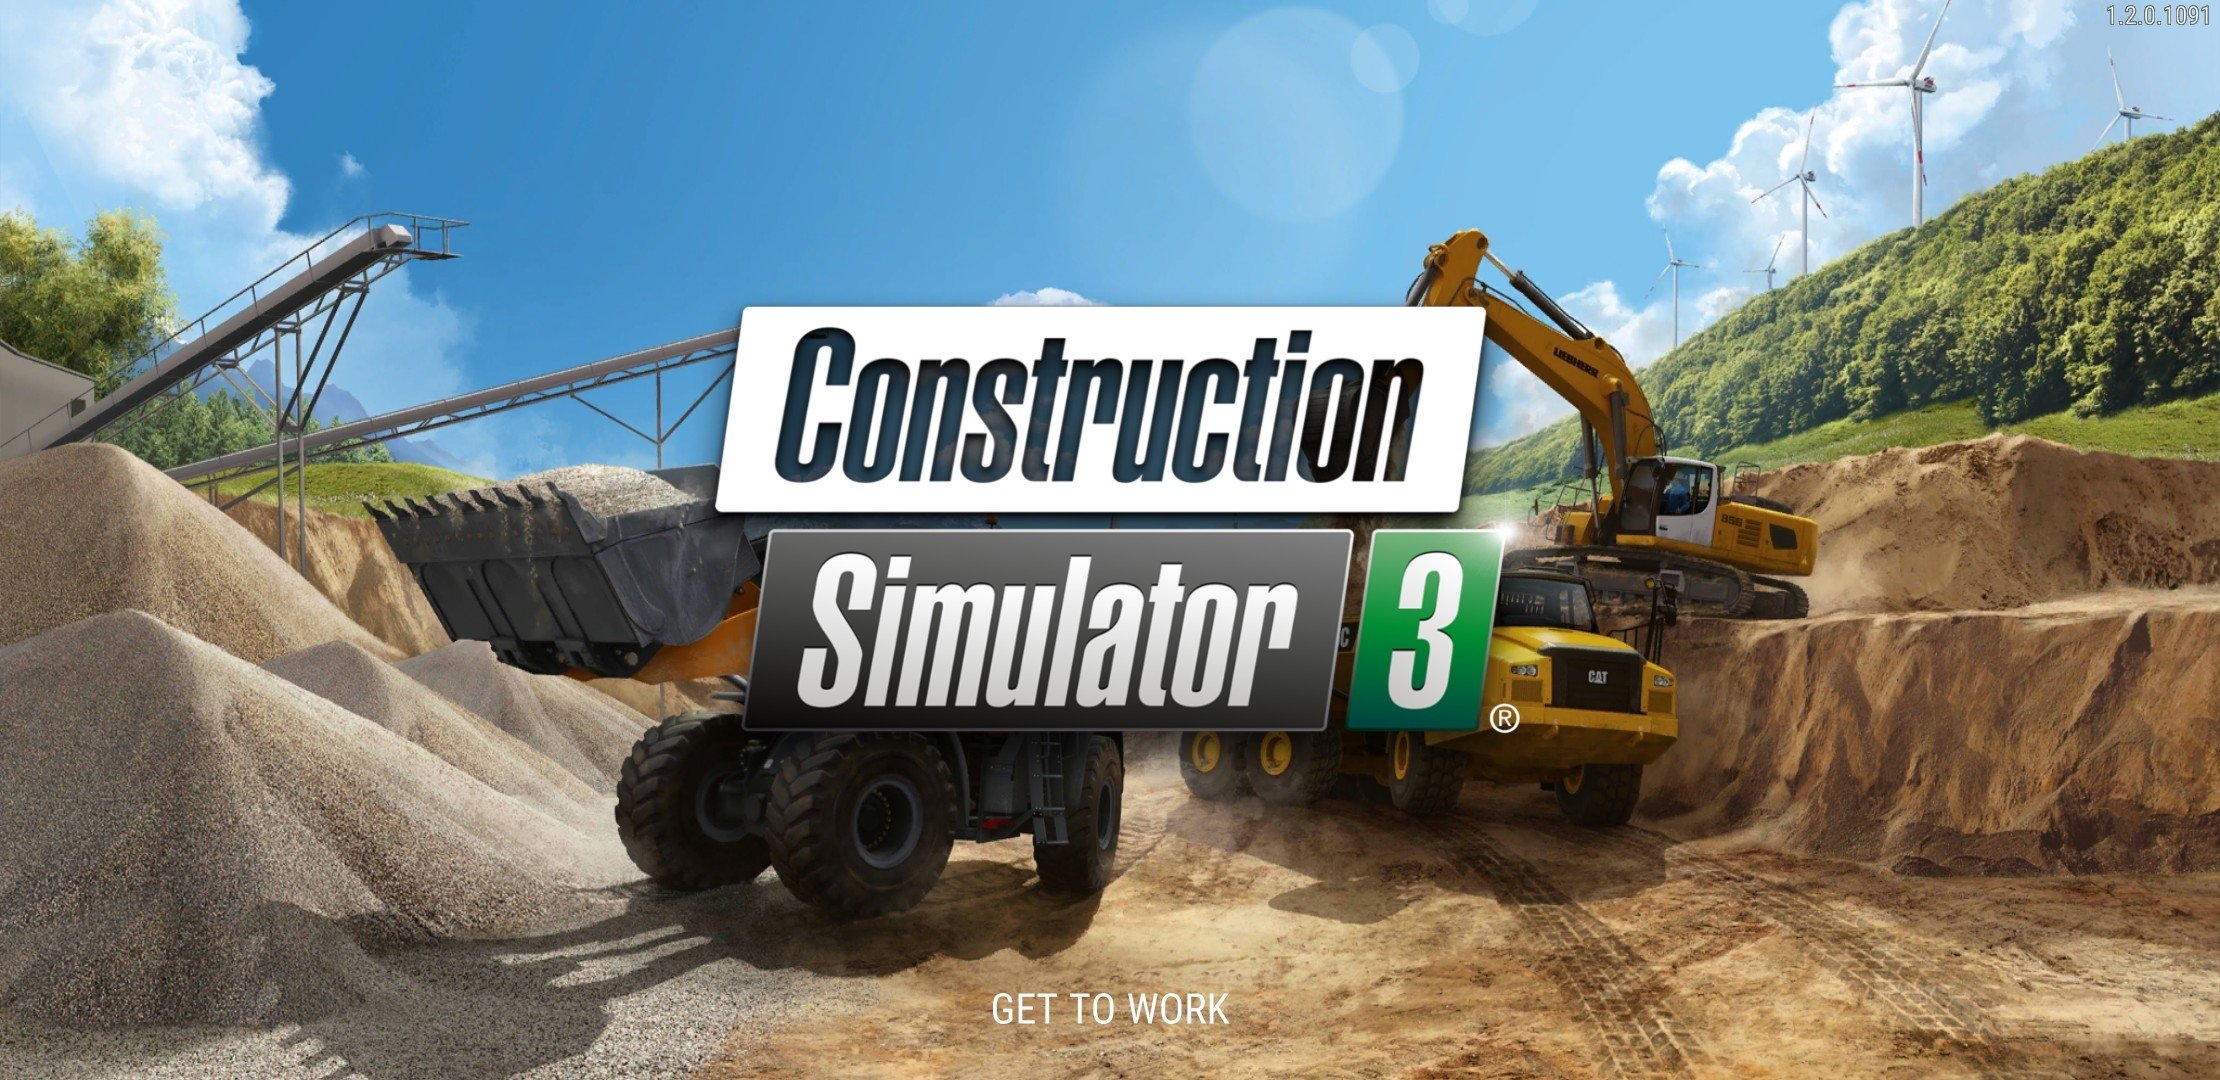 OffRoad Construction Simulator 3D - Heavy Builders free